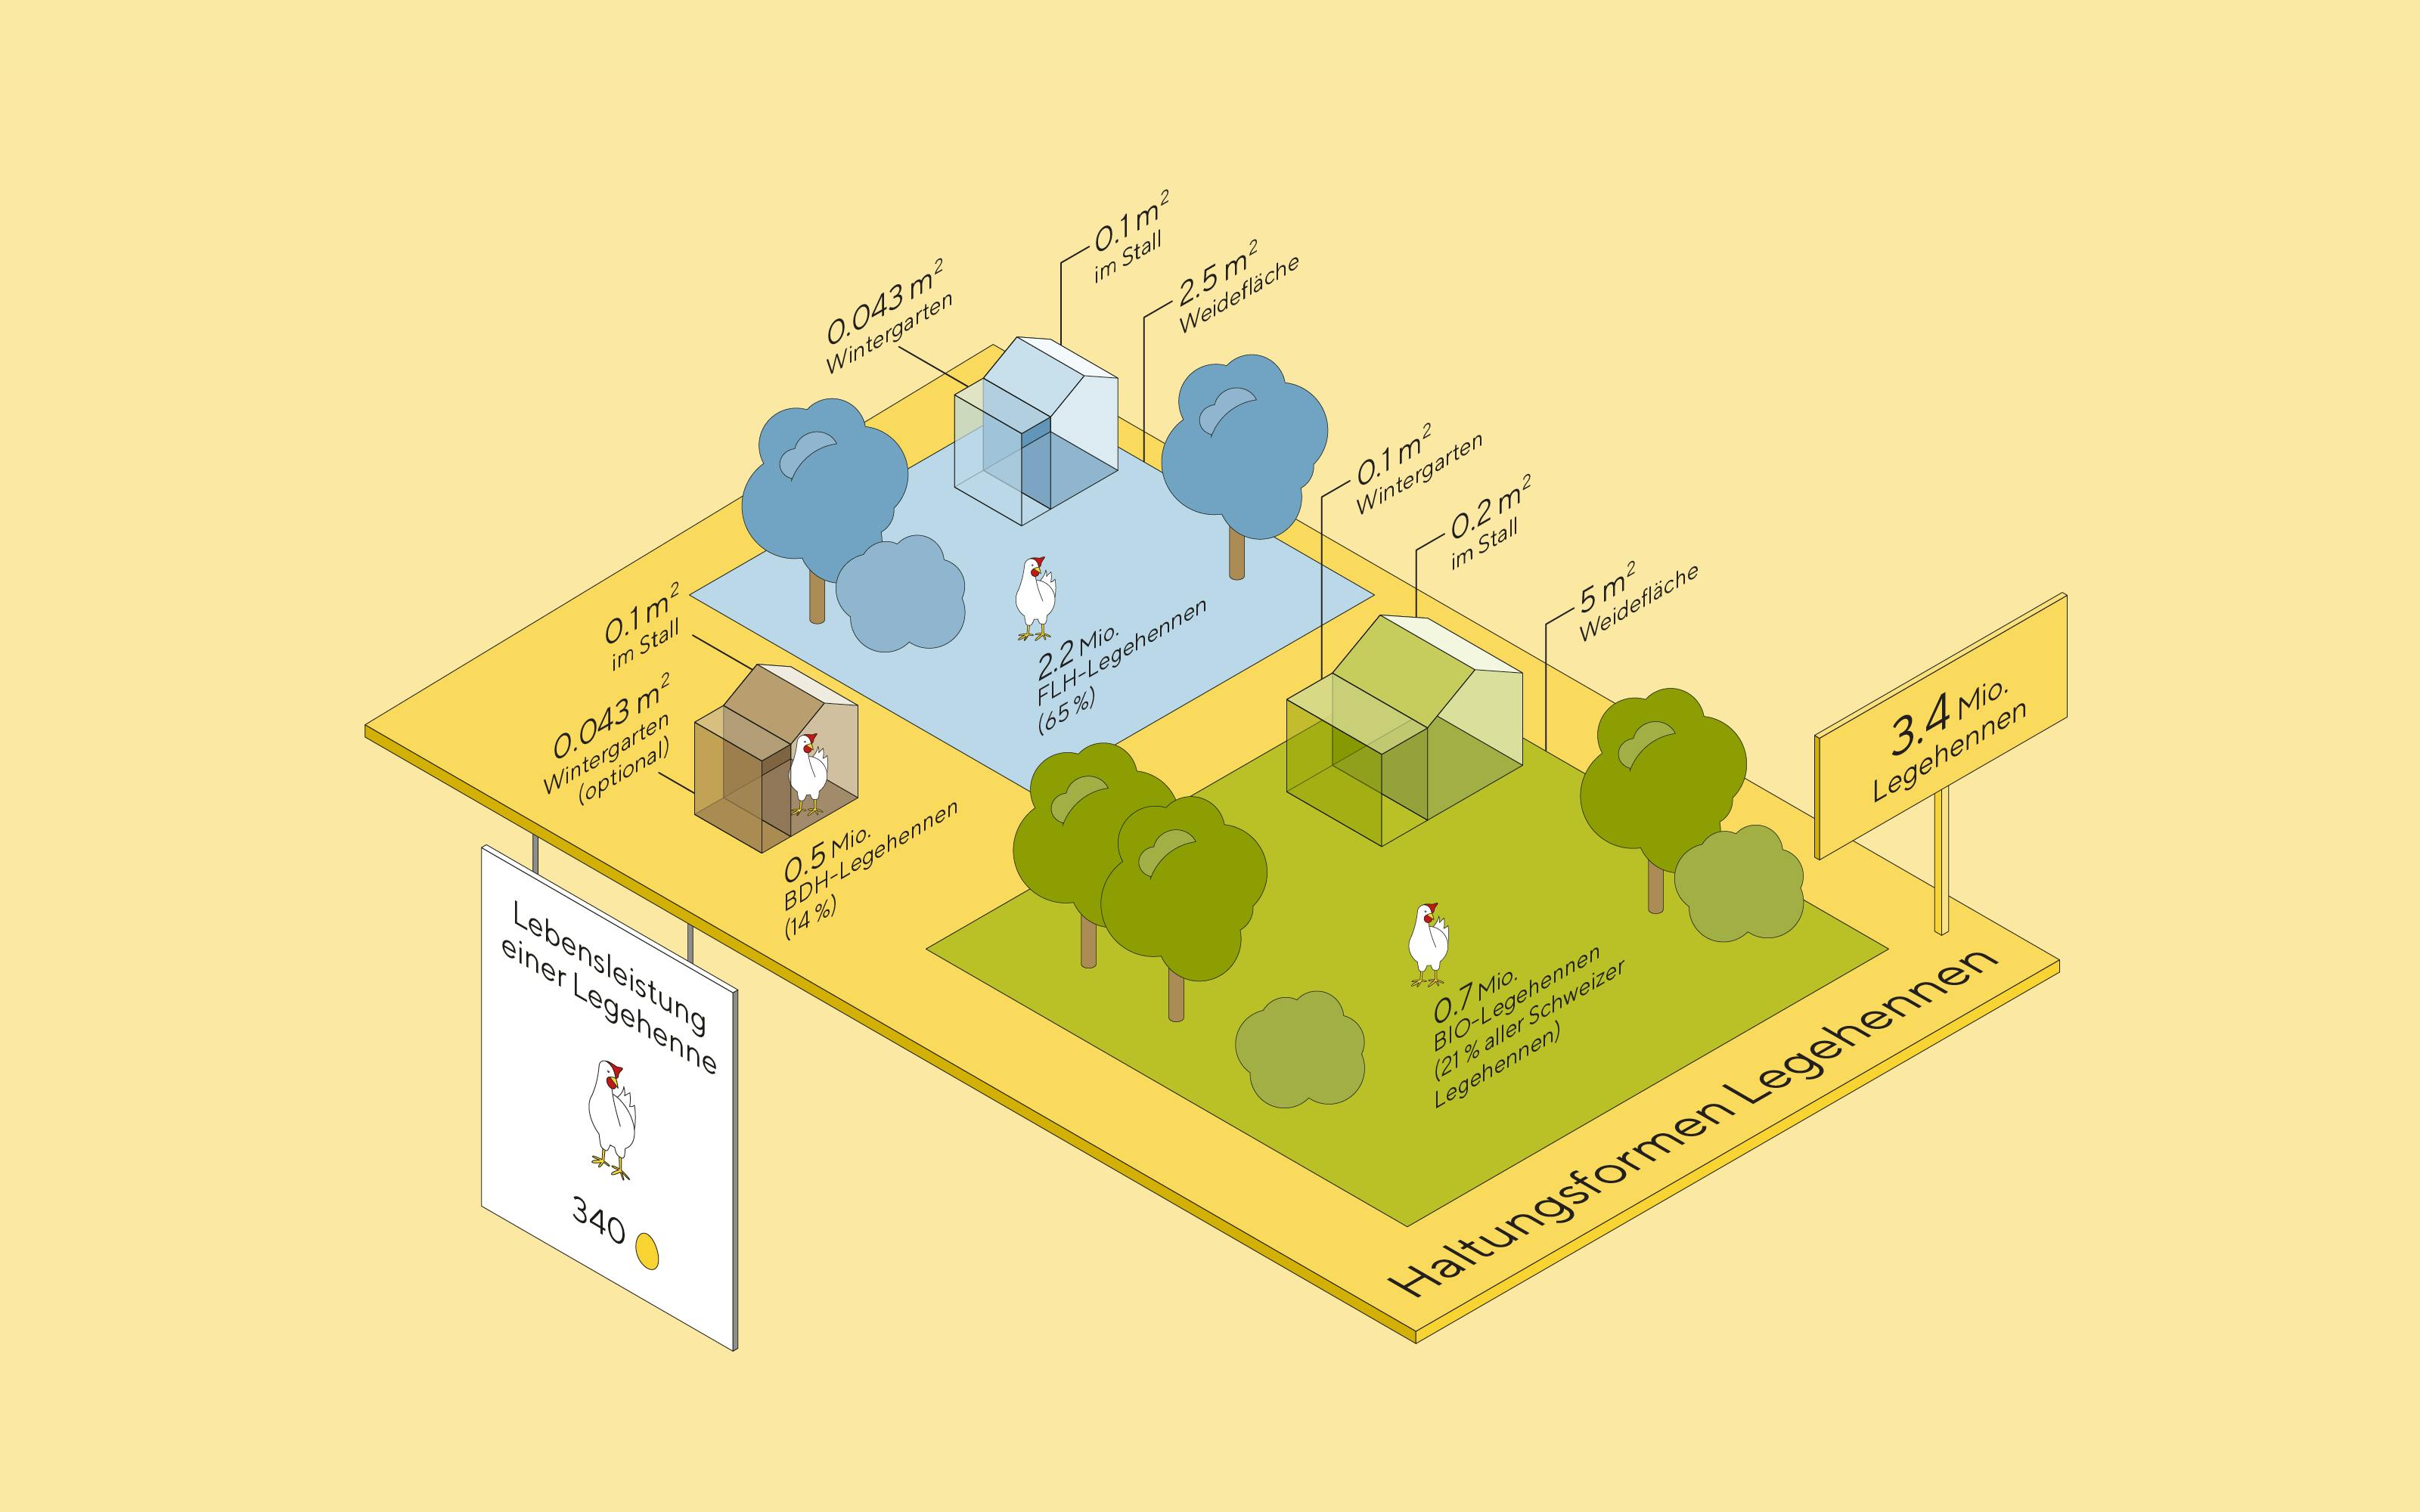 The central part of the infographic are the four steps of the value-added chain. From there we draw different ‘side stories’ such as conditions for different production methods, distribution and size of breeding farms, and international comparison about egg consumption. For the look and feel, we chose the isometric view as this allowed us to accurately display volumes and sizes in an understandable and attractive way.